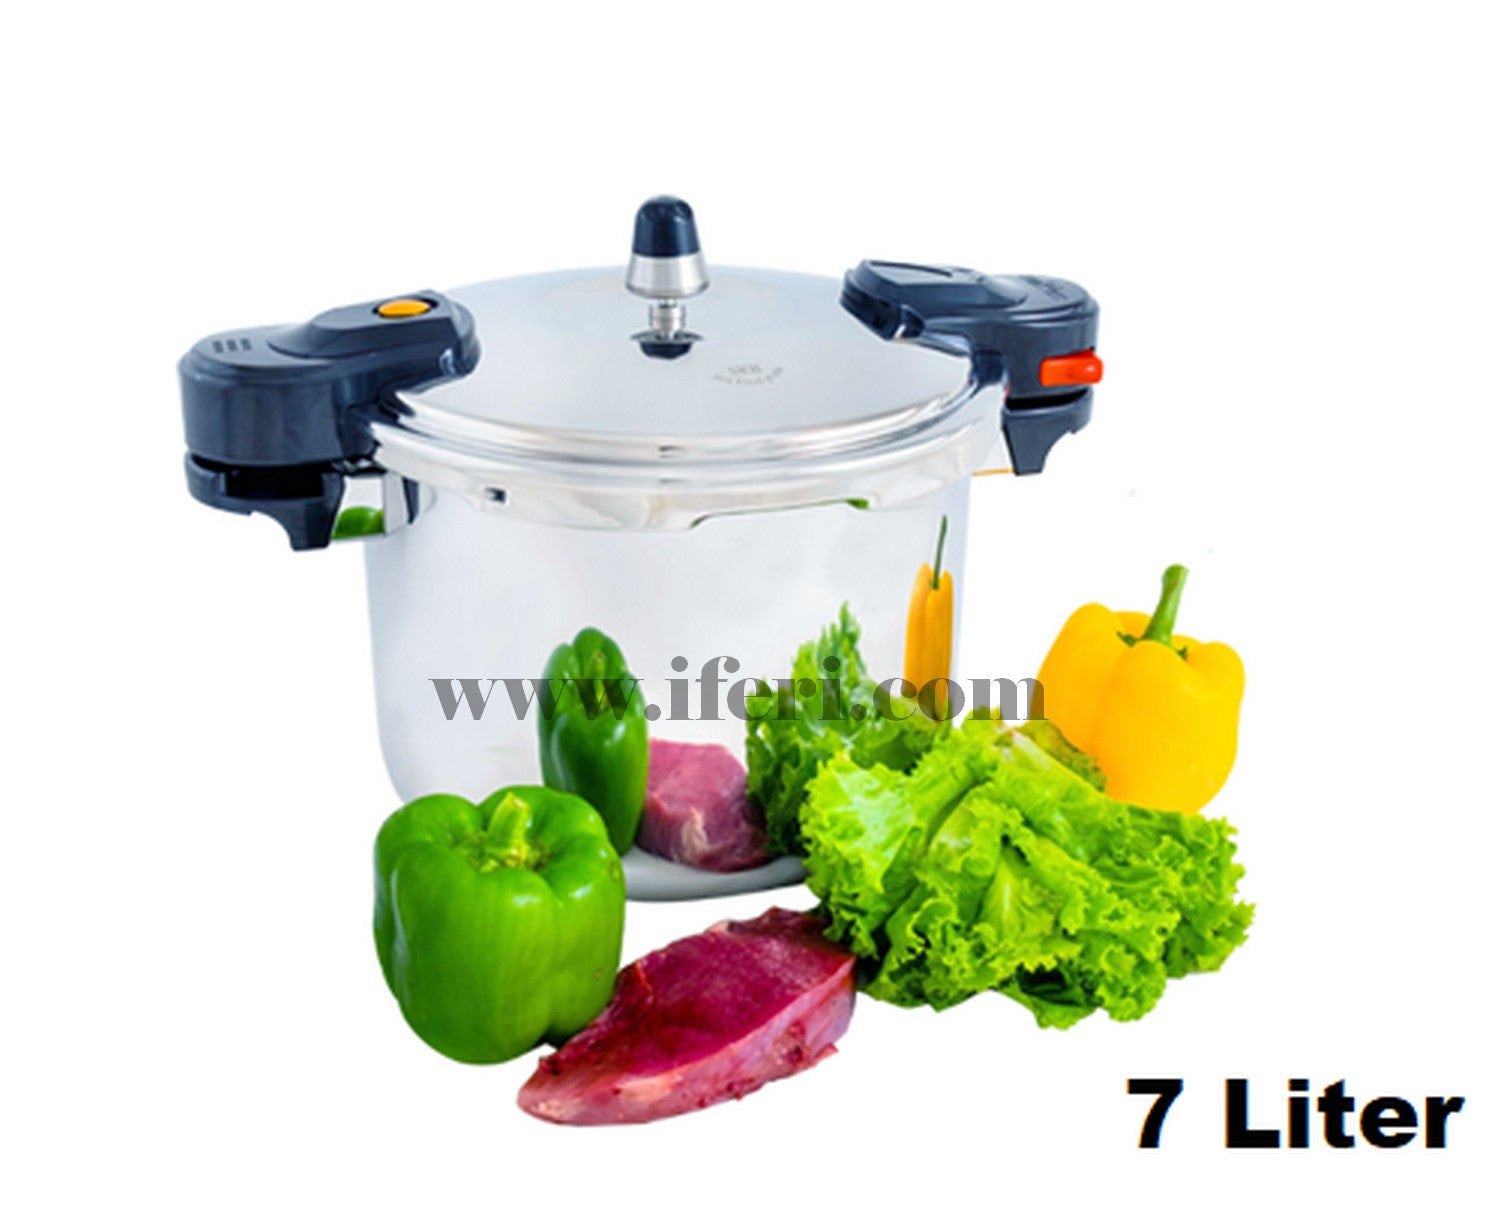 SKB 7 Liter Stainless Steel 3 ply Pressure Cooker 3P-PC-07